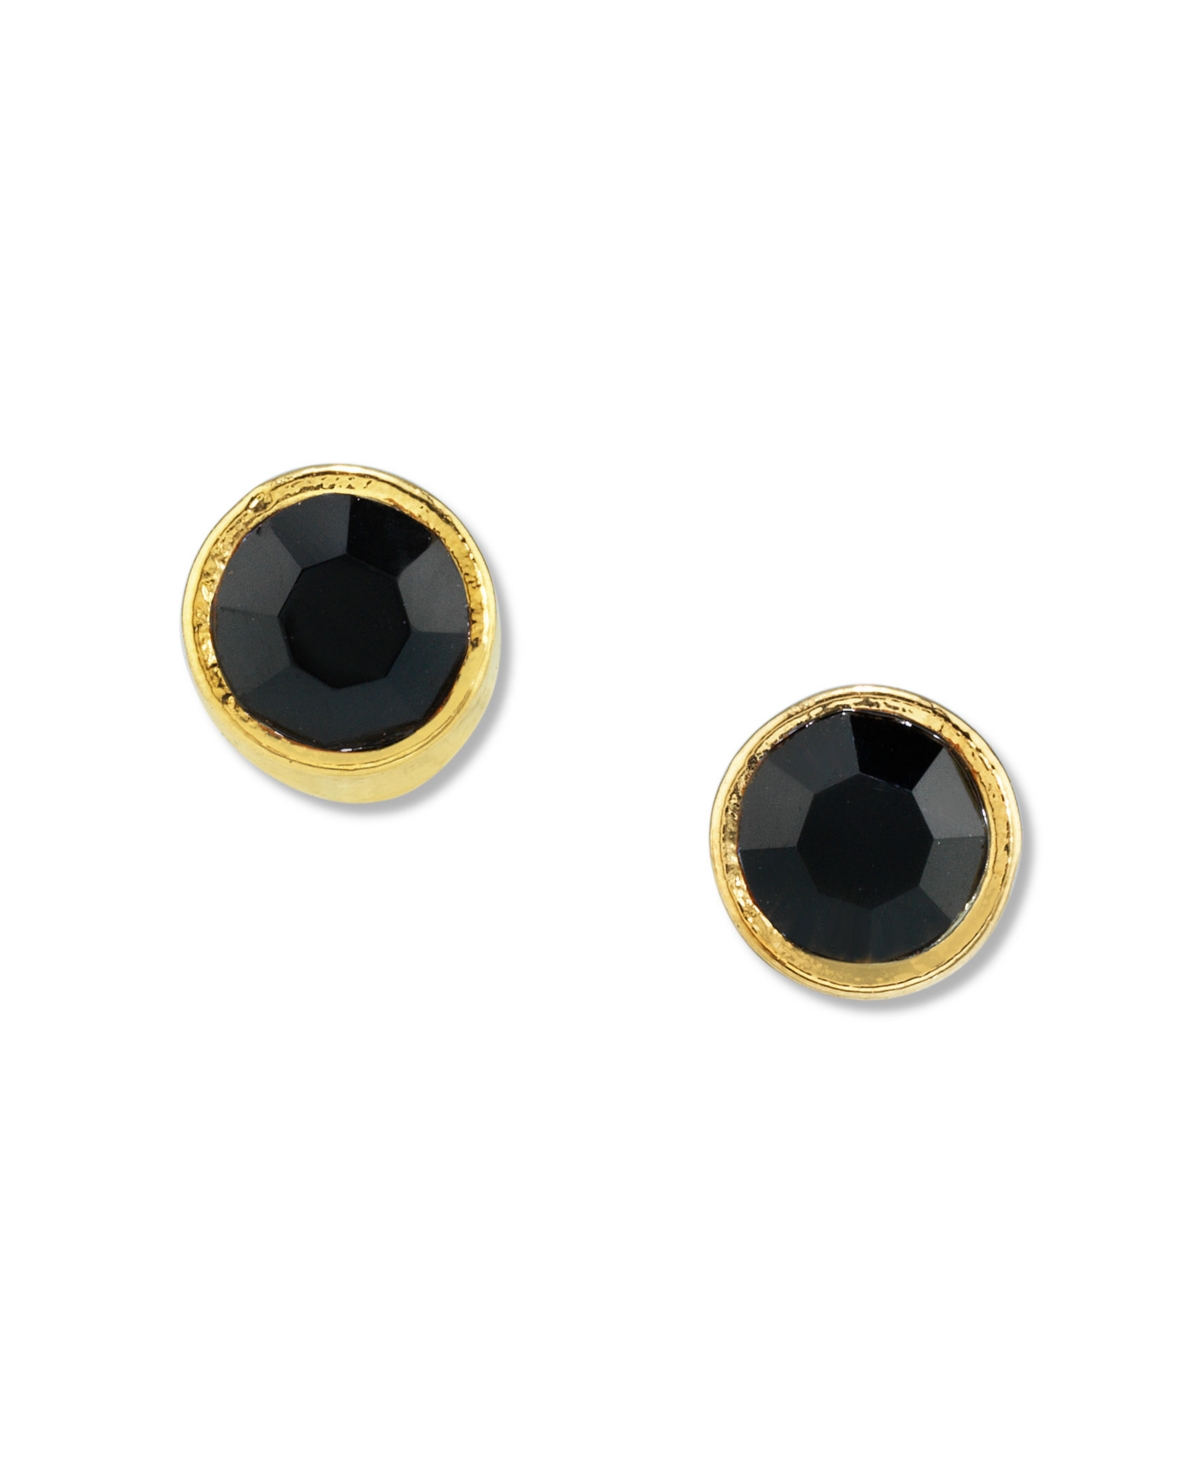 14K Gold-tone Round Crystal Stainless Steel Stud Earring - Black